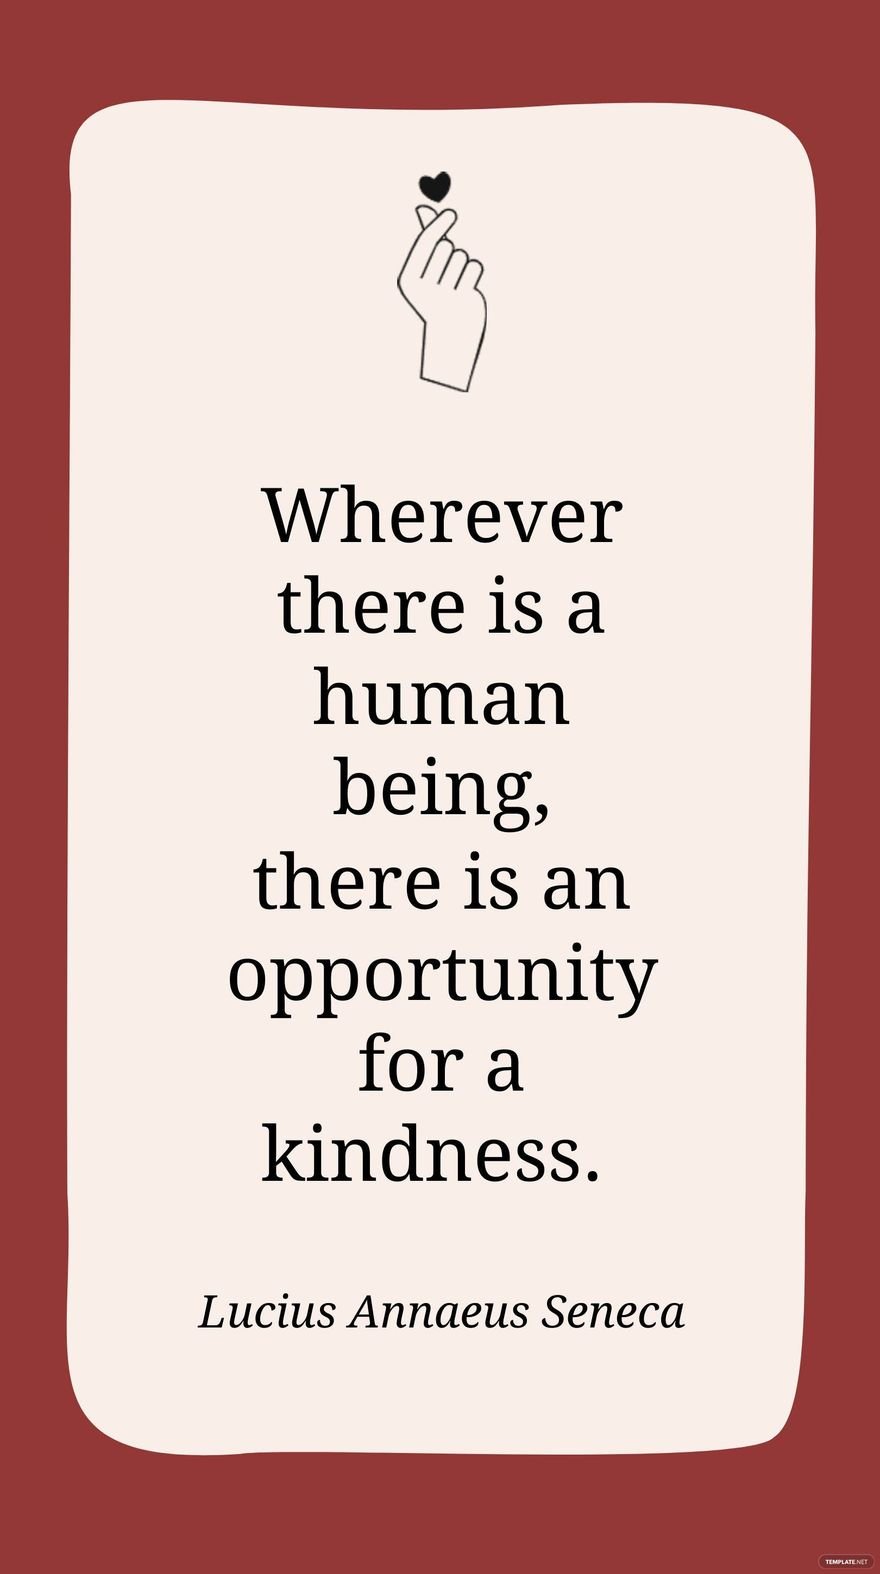 Lucius Annaeus Seneca - Wherever there is a human being, there is an opportunity for a kindness.